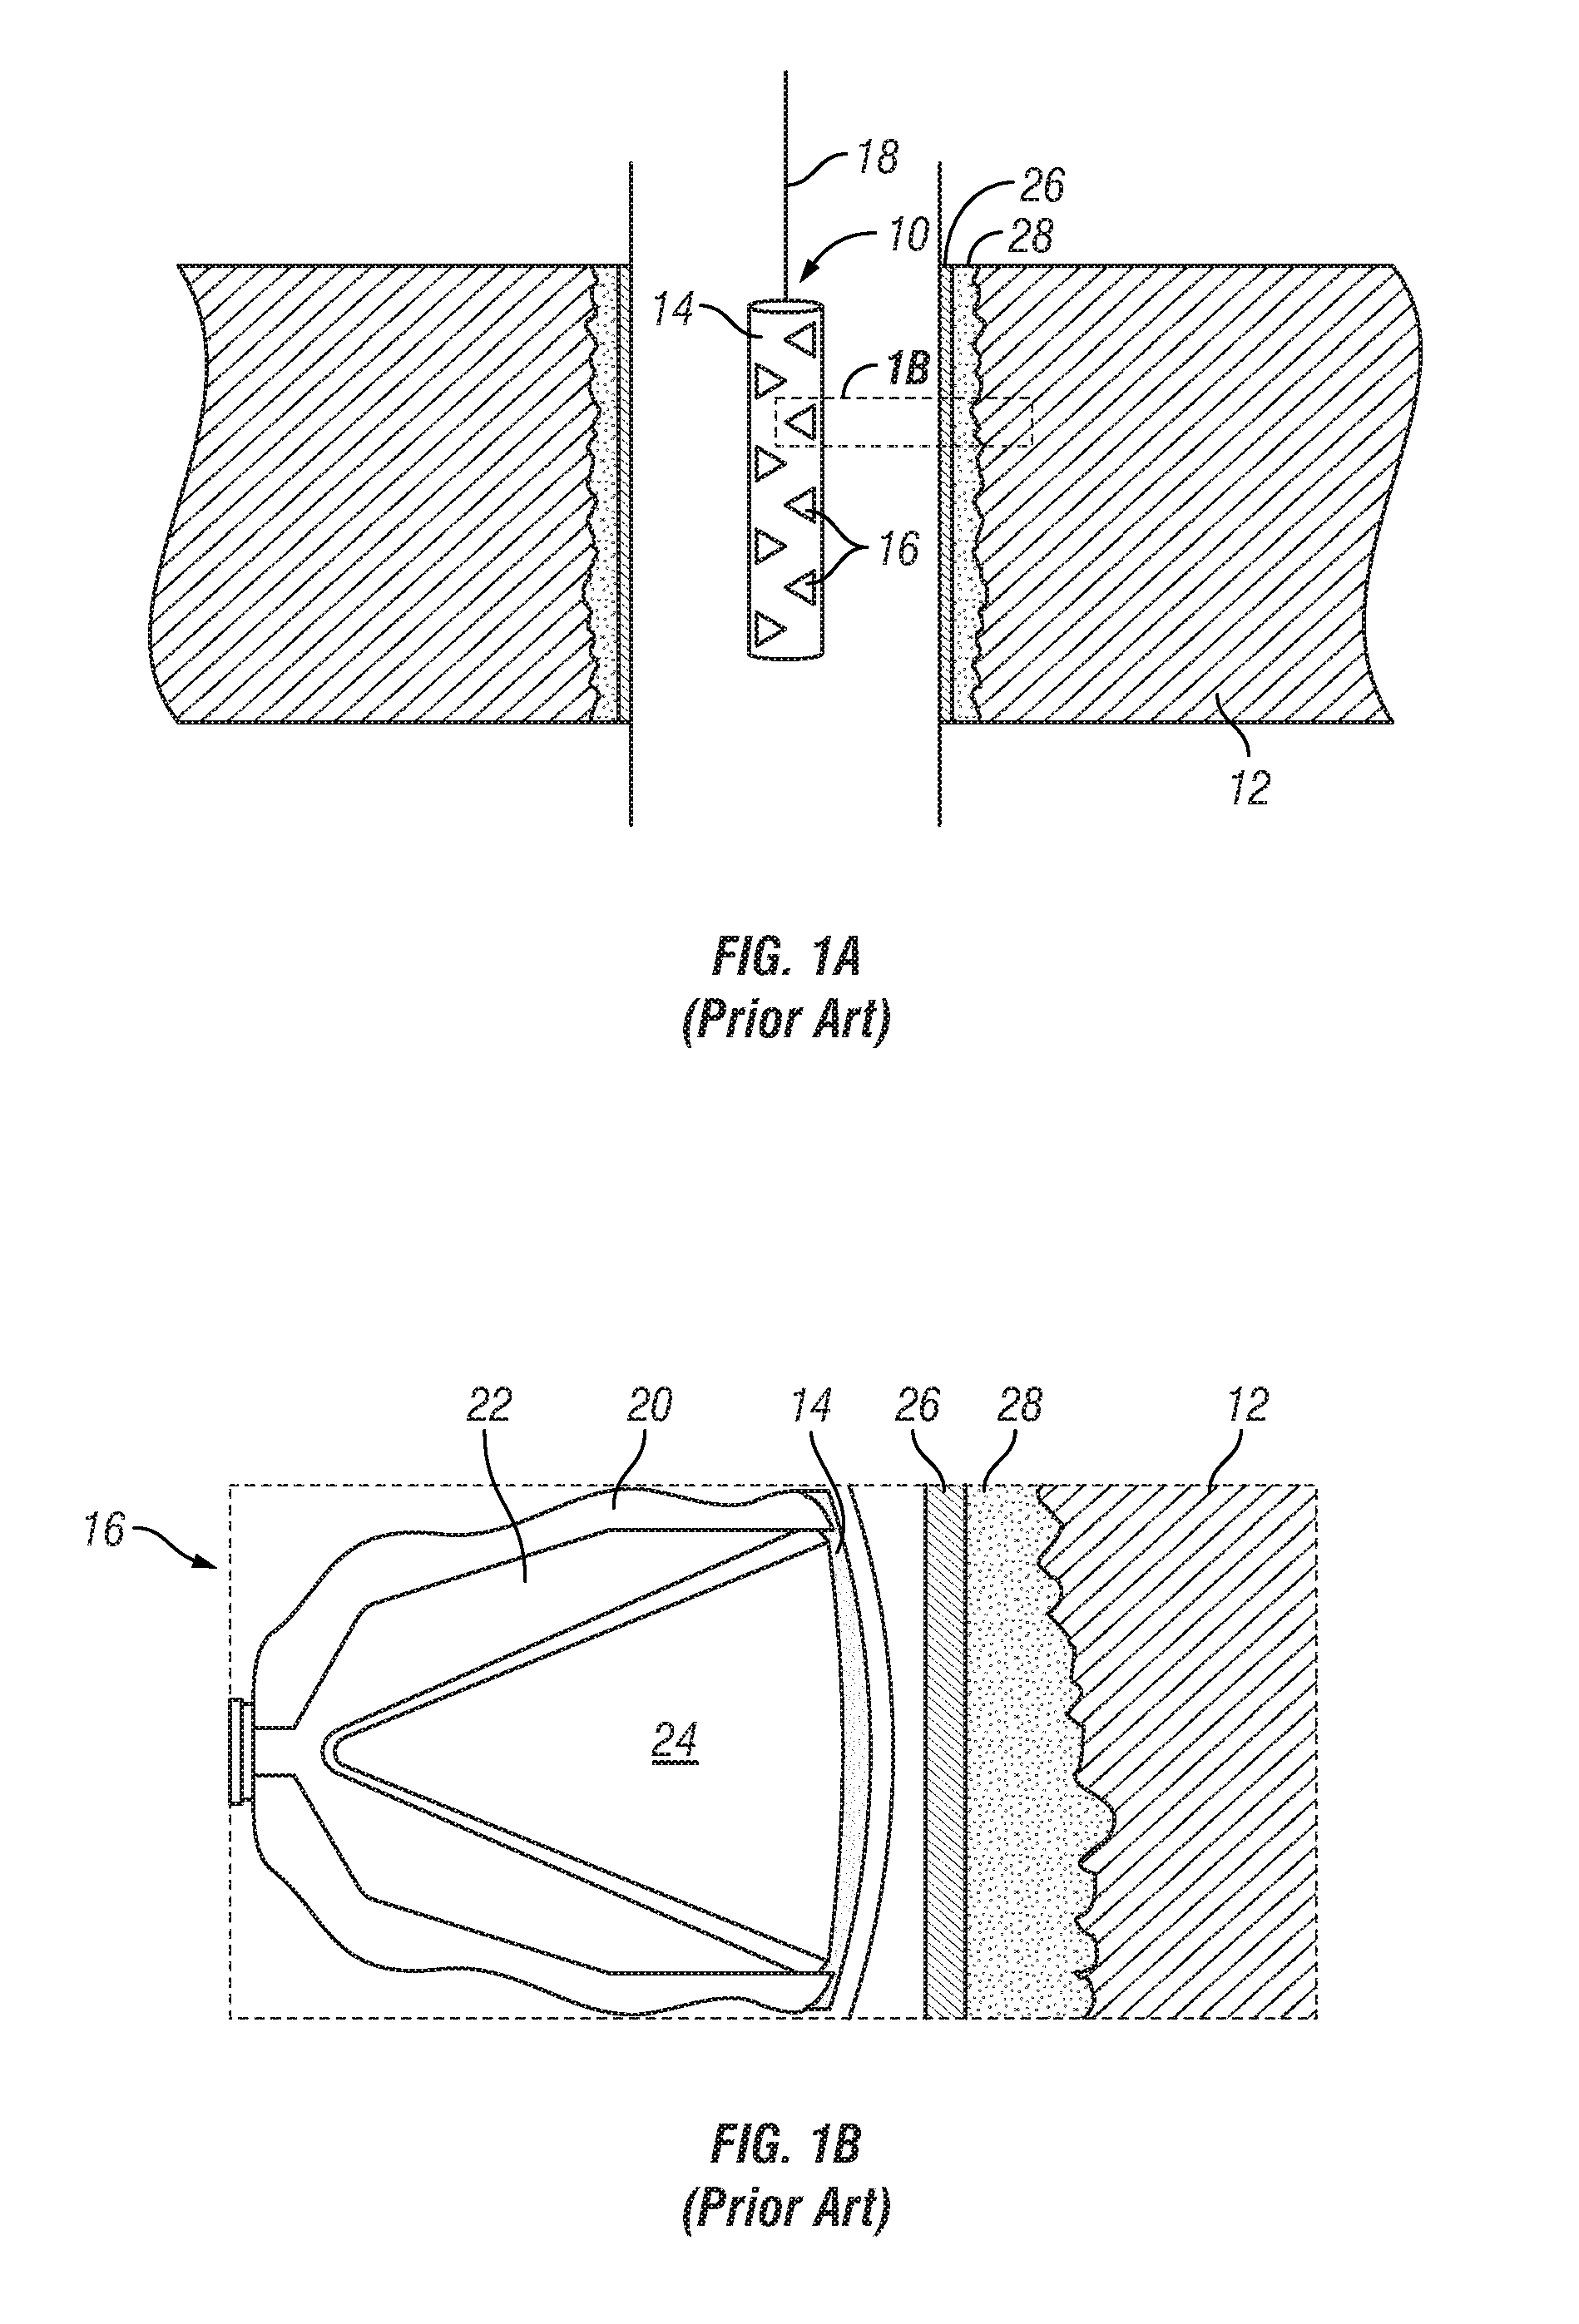 Method for the Enhancement of Injection Activities and Stimulation of Oil and Gas Production